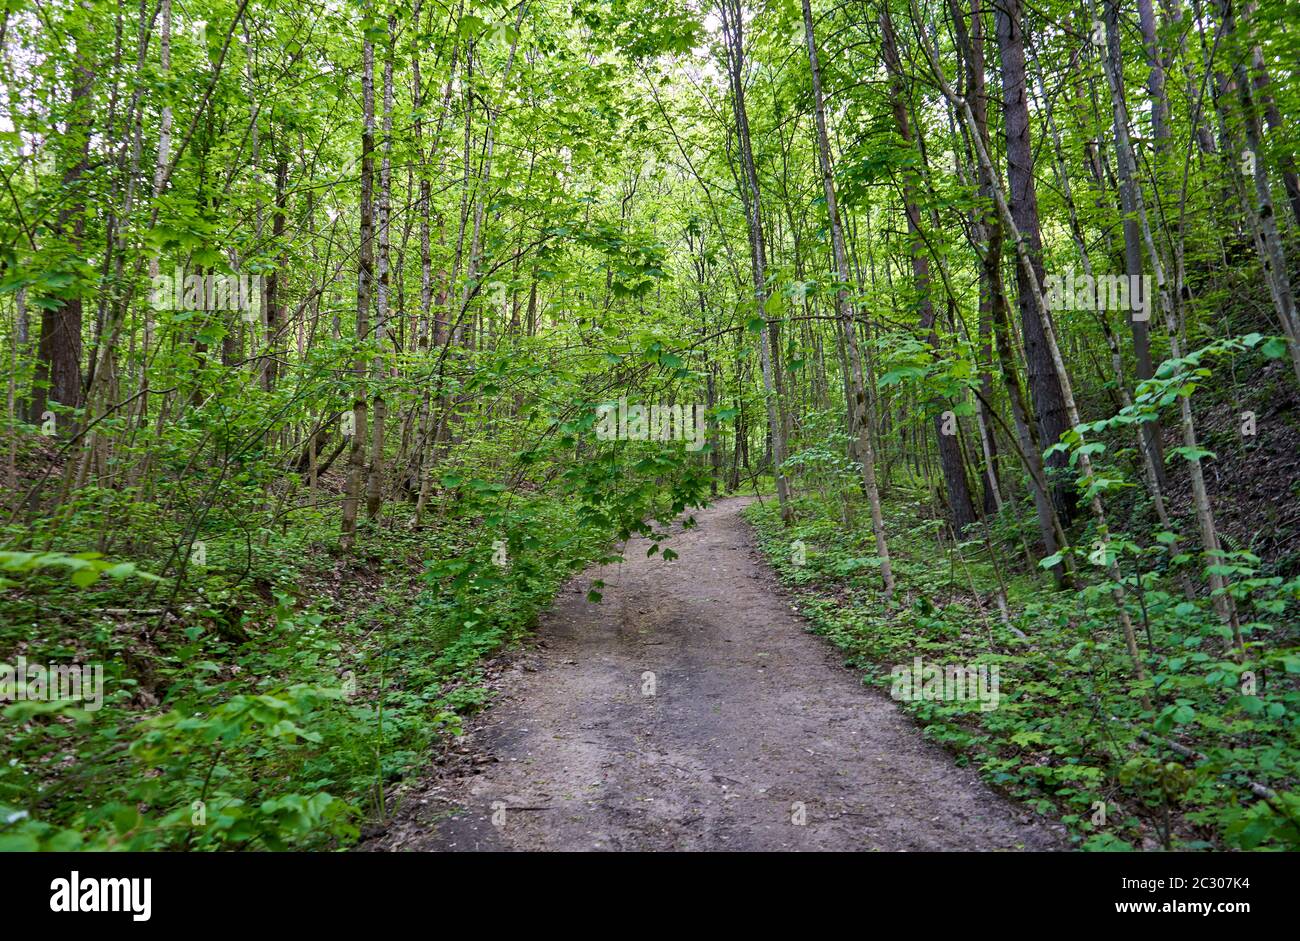 Path in the forest with tall trees Stock Photo